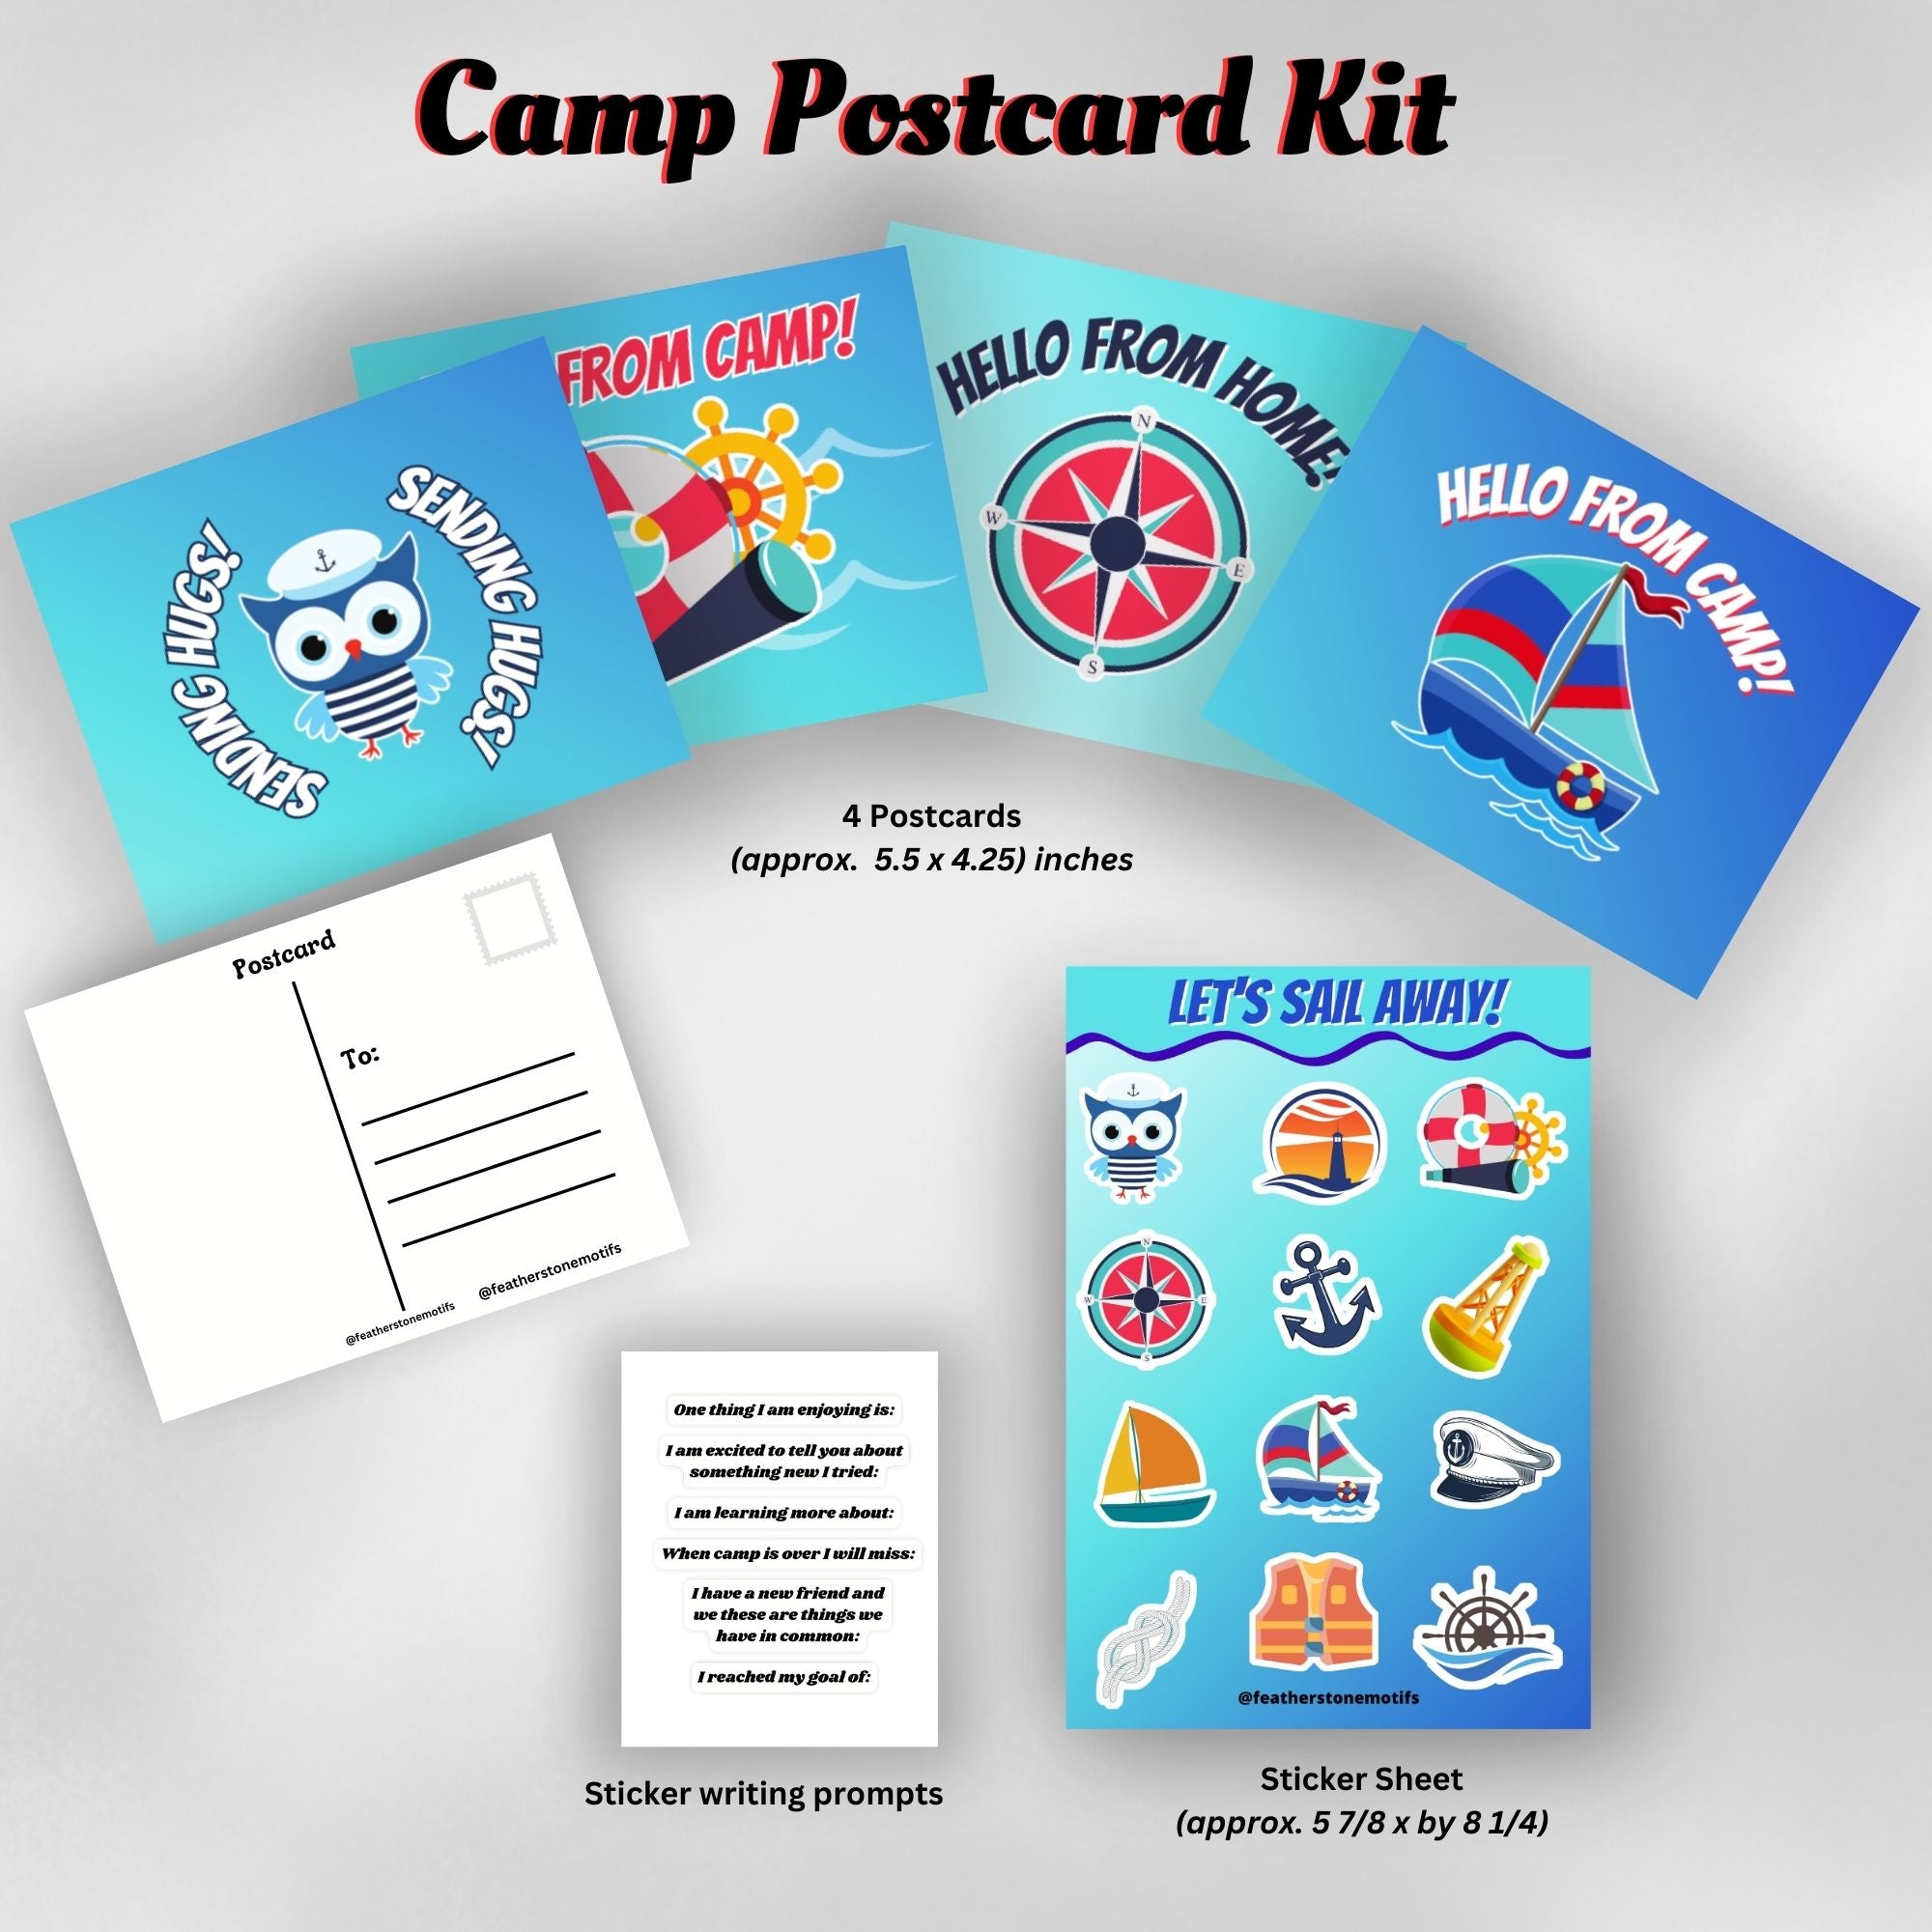 This image shows the Sailing themed Camp Postcard Kit with dimensions and descriptions for each item.